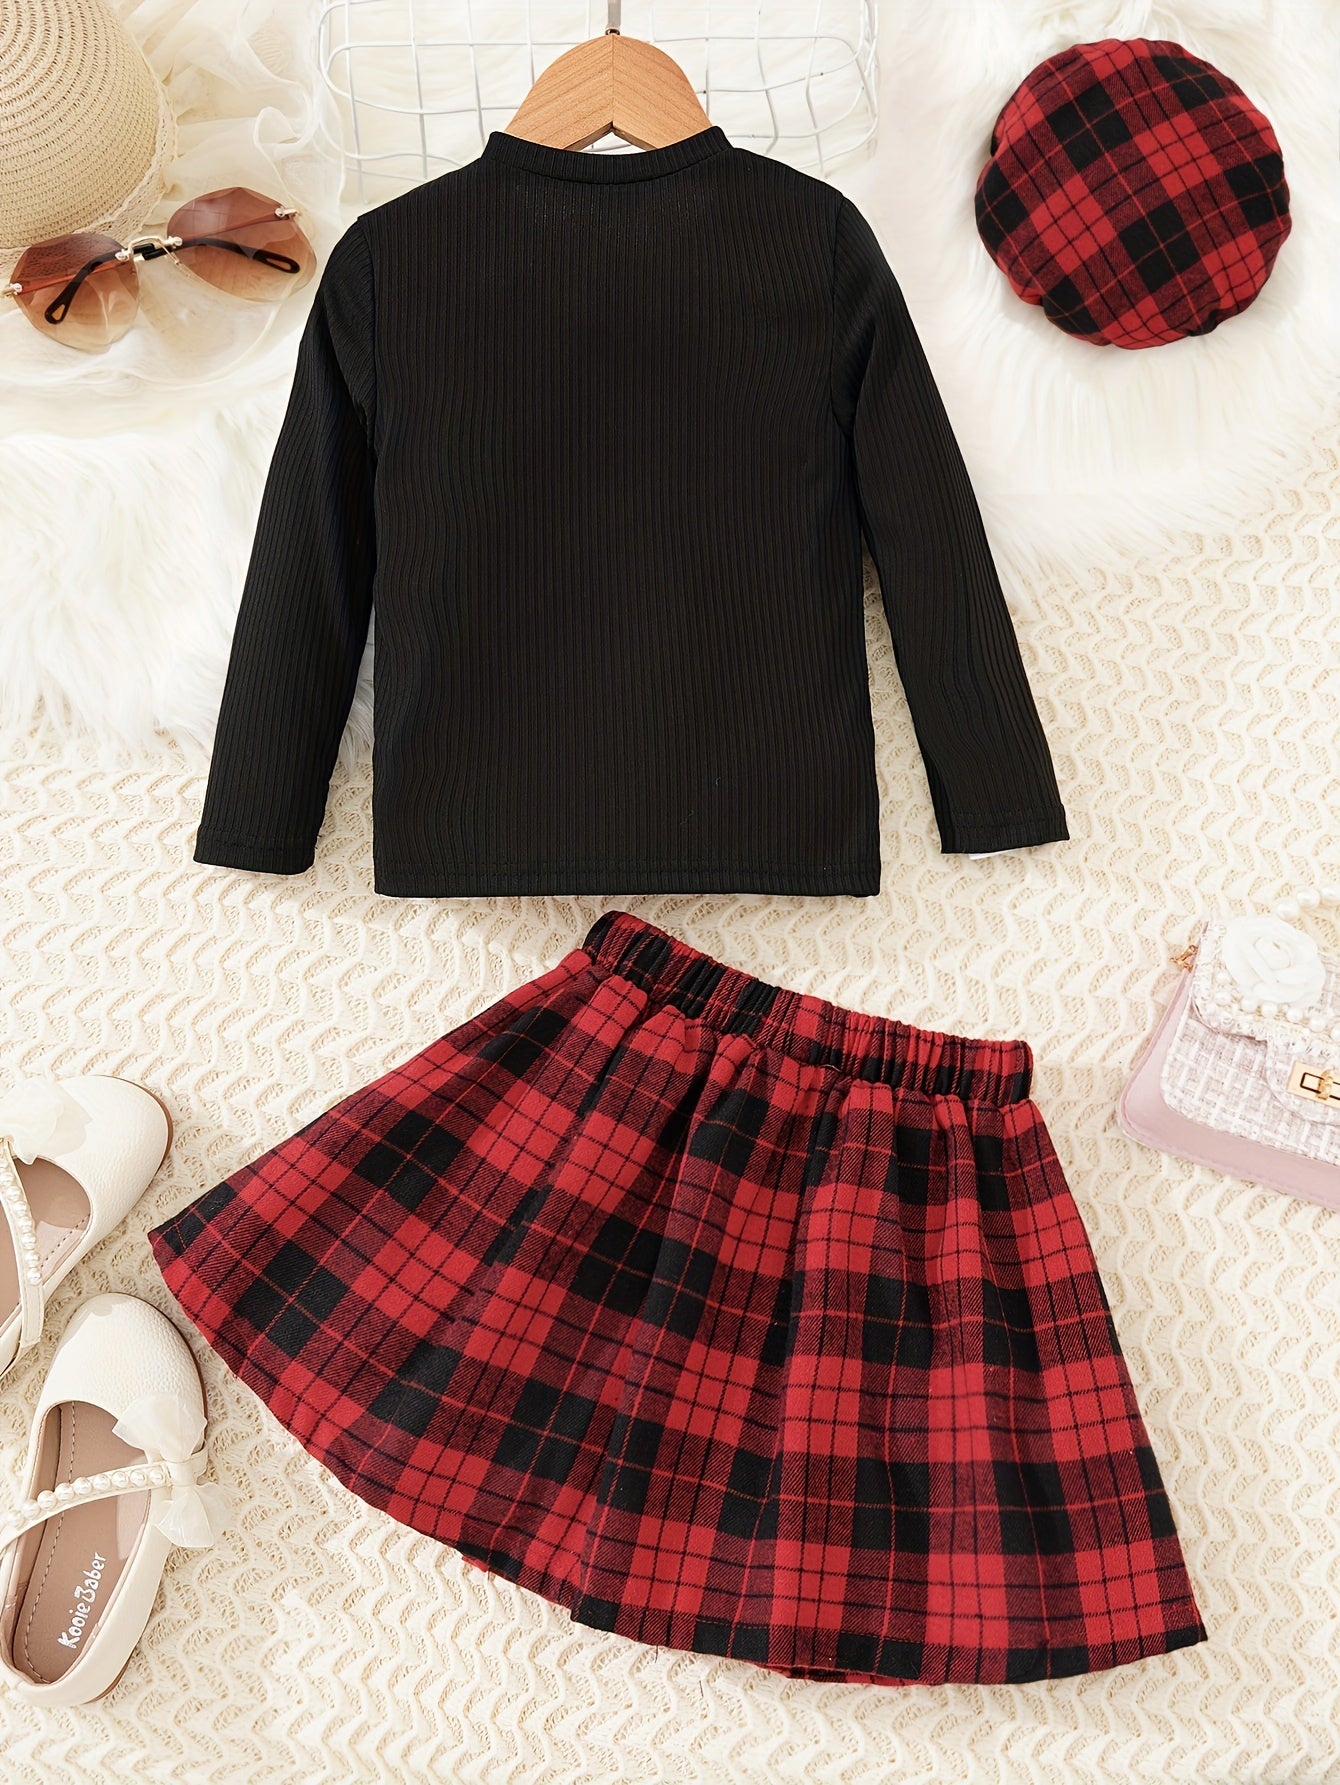 Girls 3pcs Ribbed Knit Long Sleeve Top & Plaid Pleated Skirt & Plaid Beret Set Kids Clothes For Party, Gift